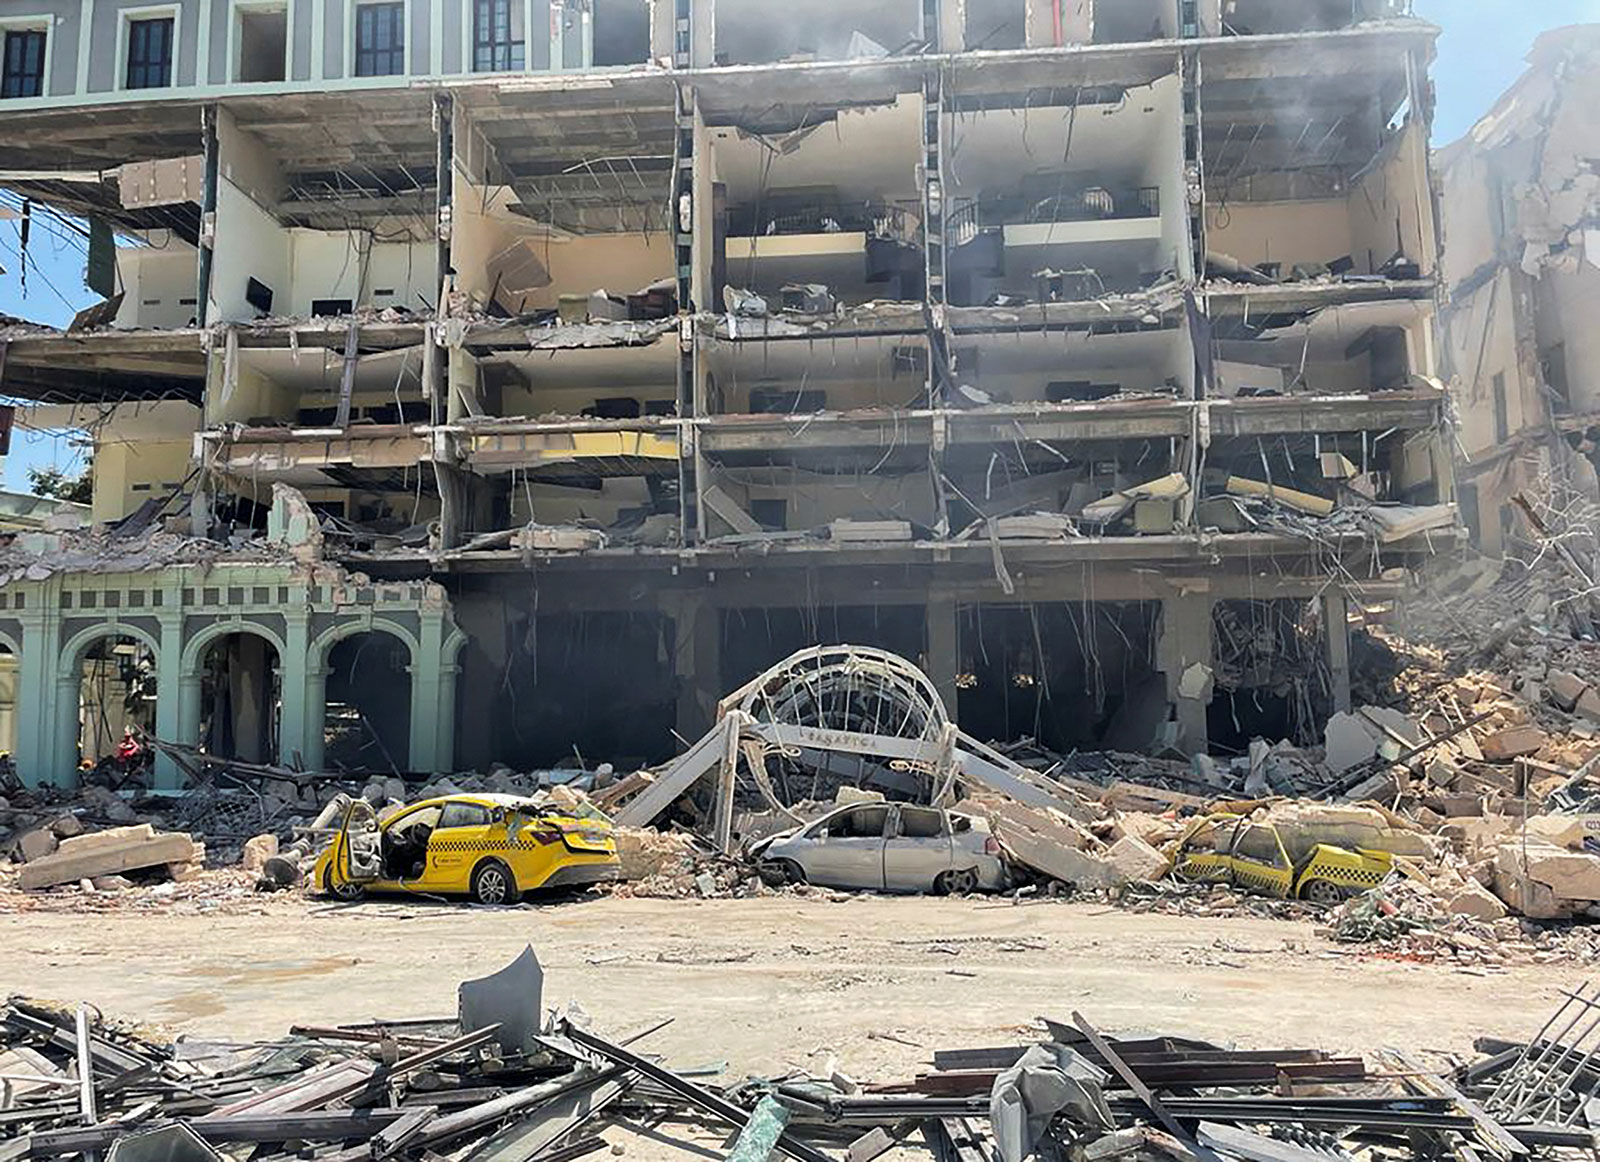 Debris is scattered after an explosion at Hotel Saratoga in Havana on May 6.